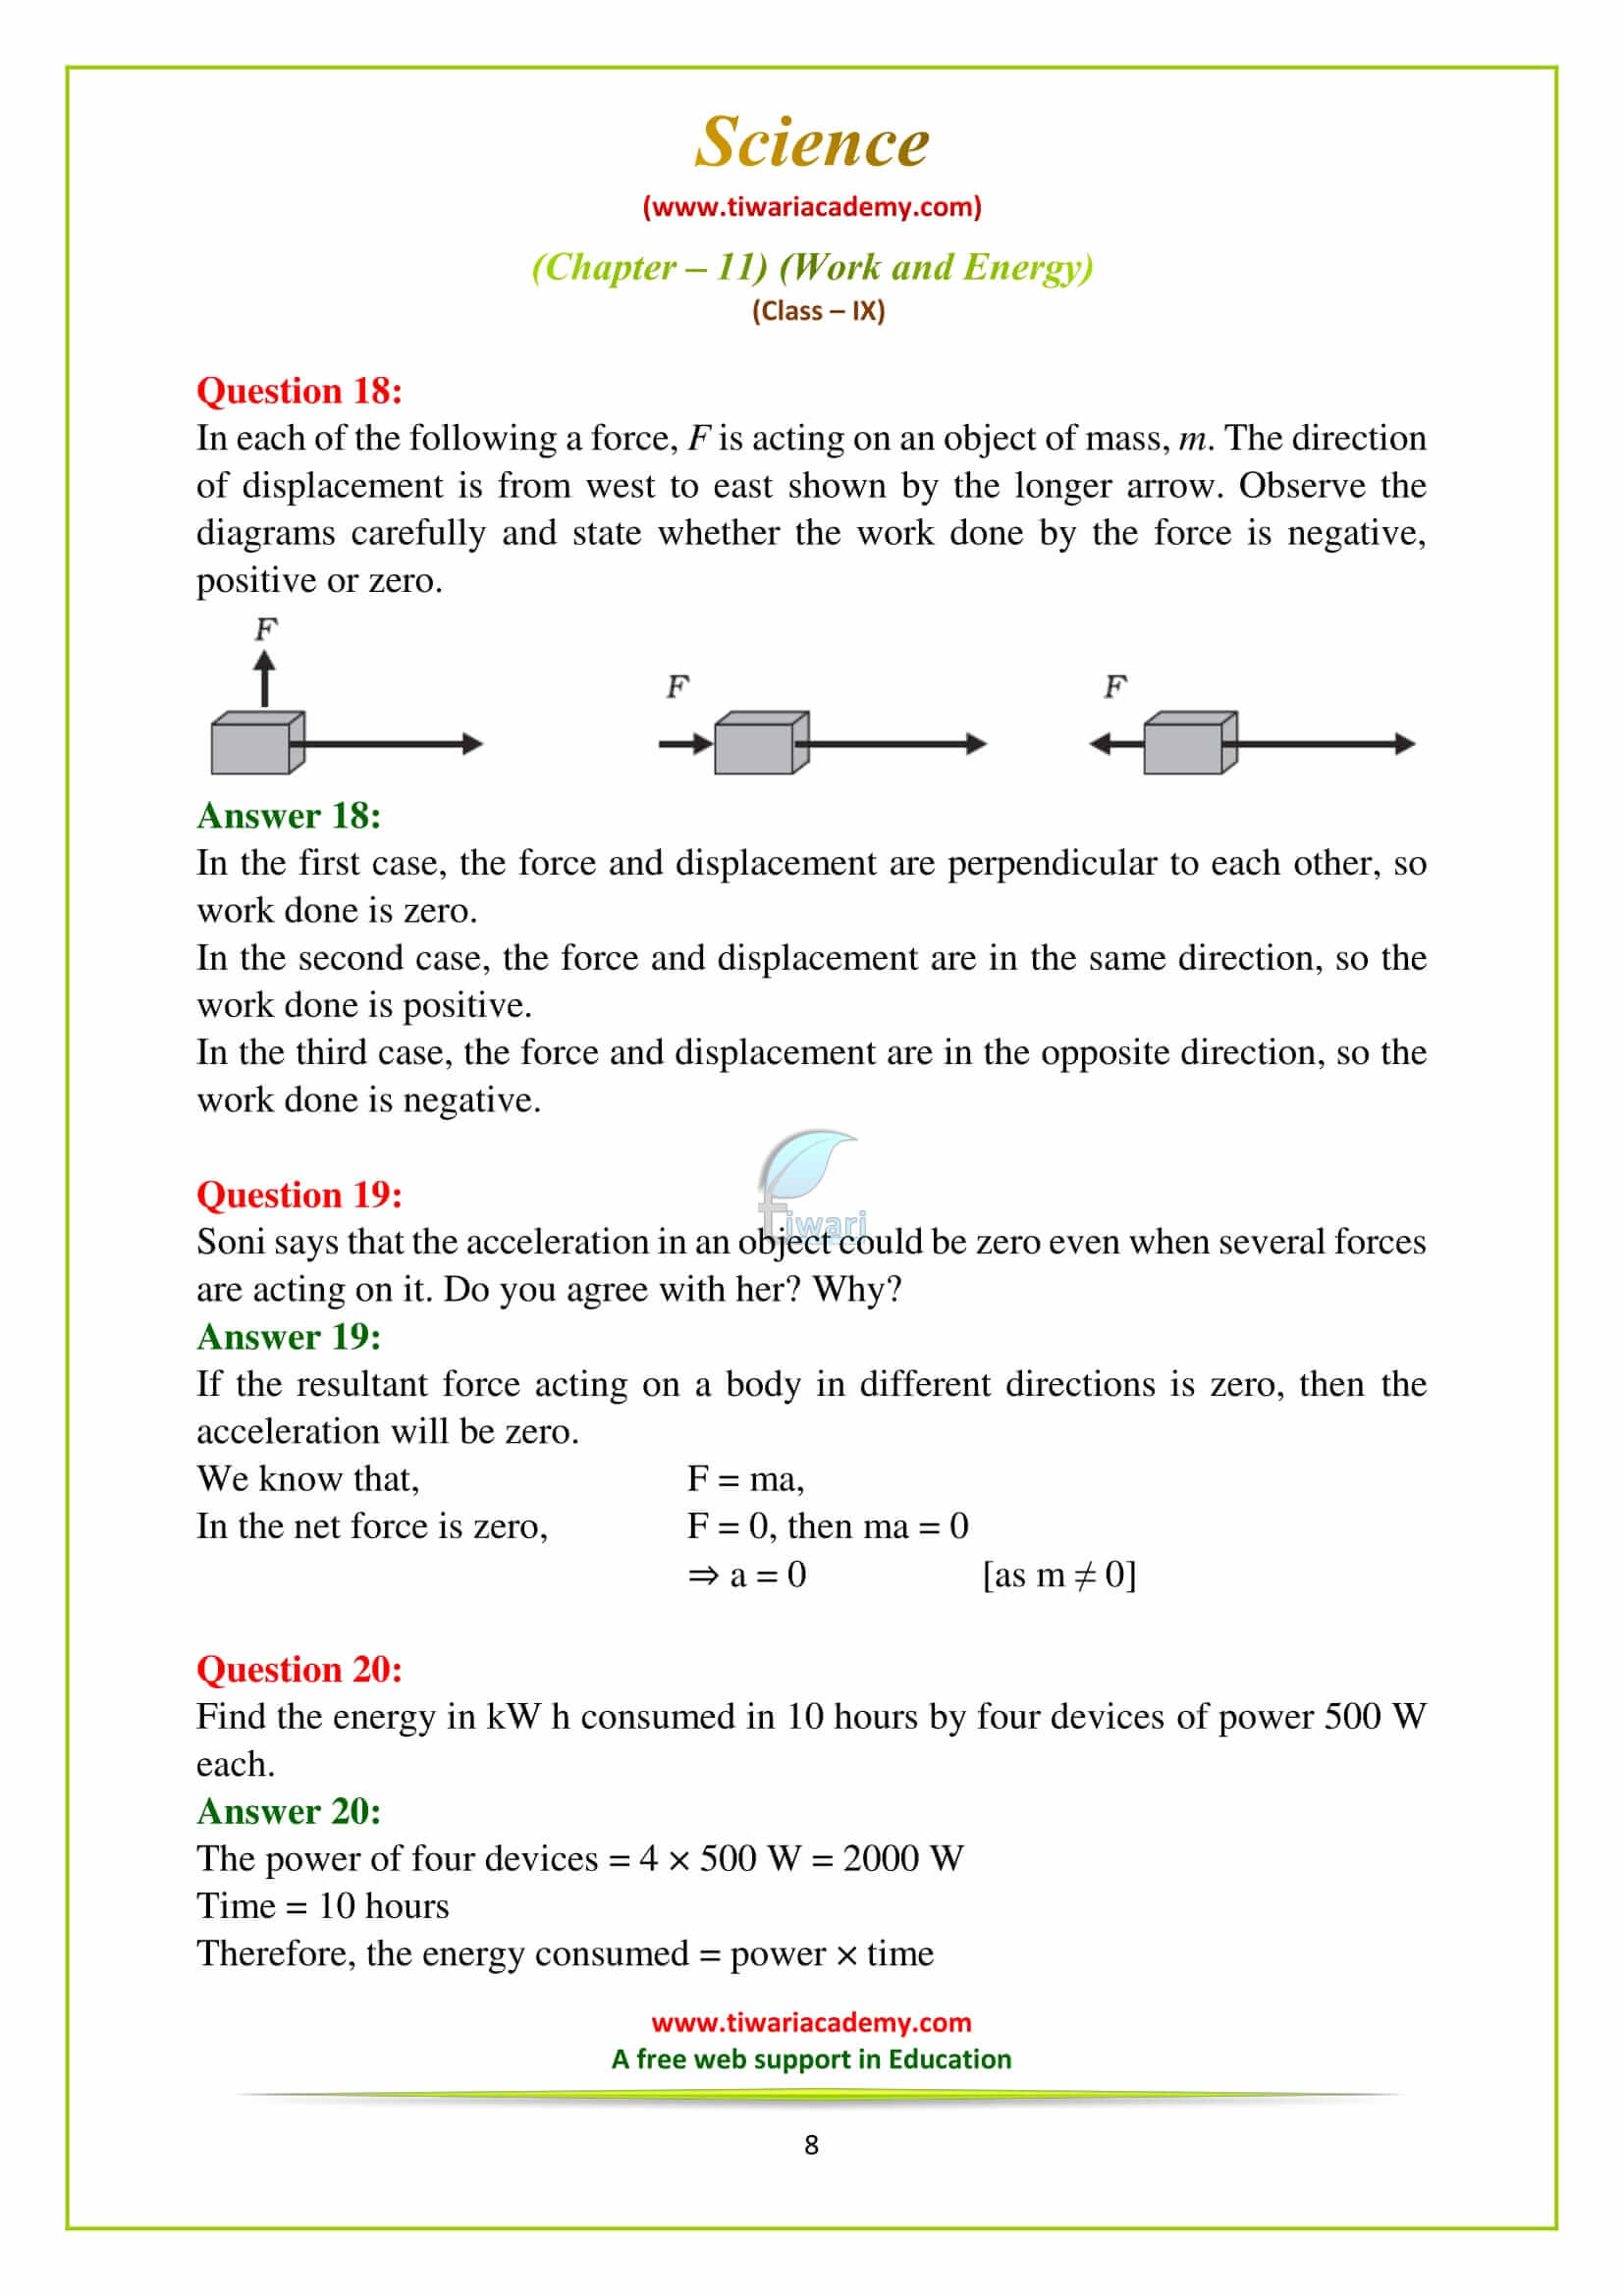 NCERT Solutions for Class 9 Science Chapter 11 in pdf